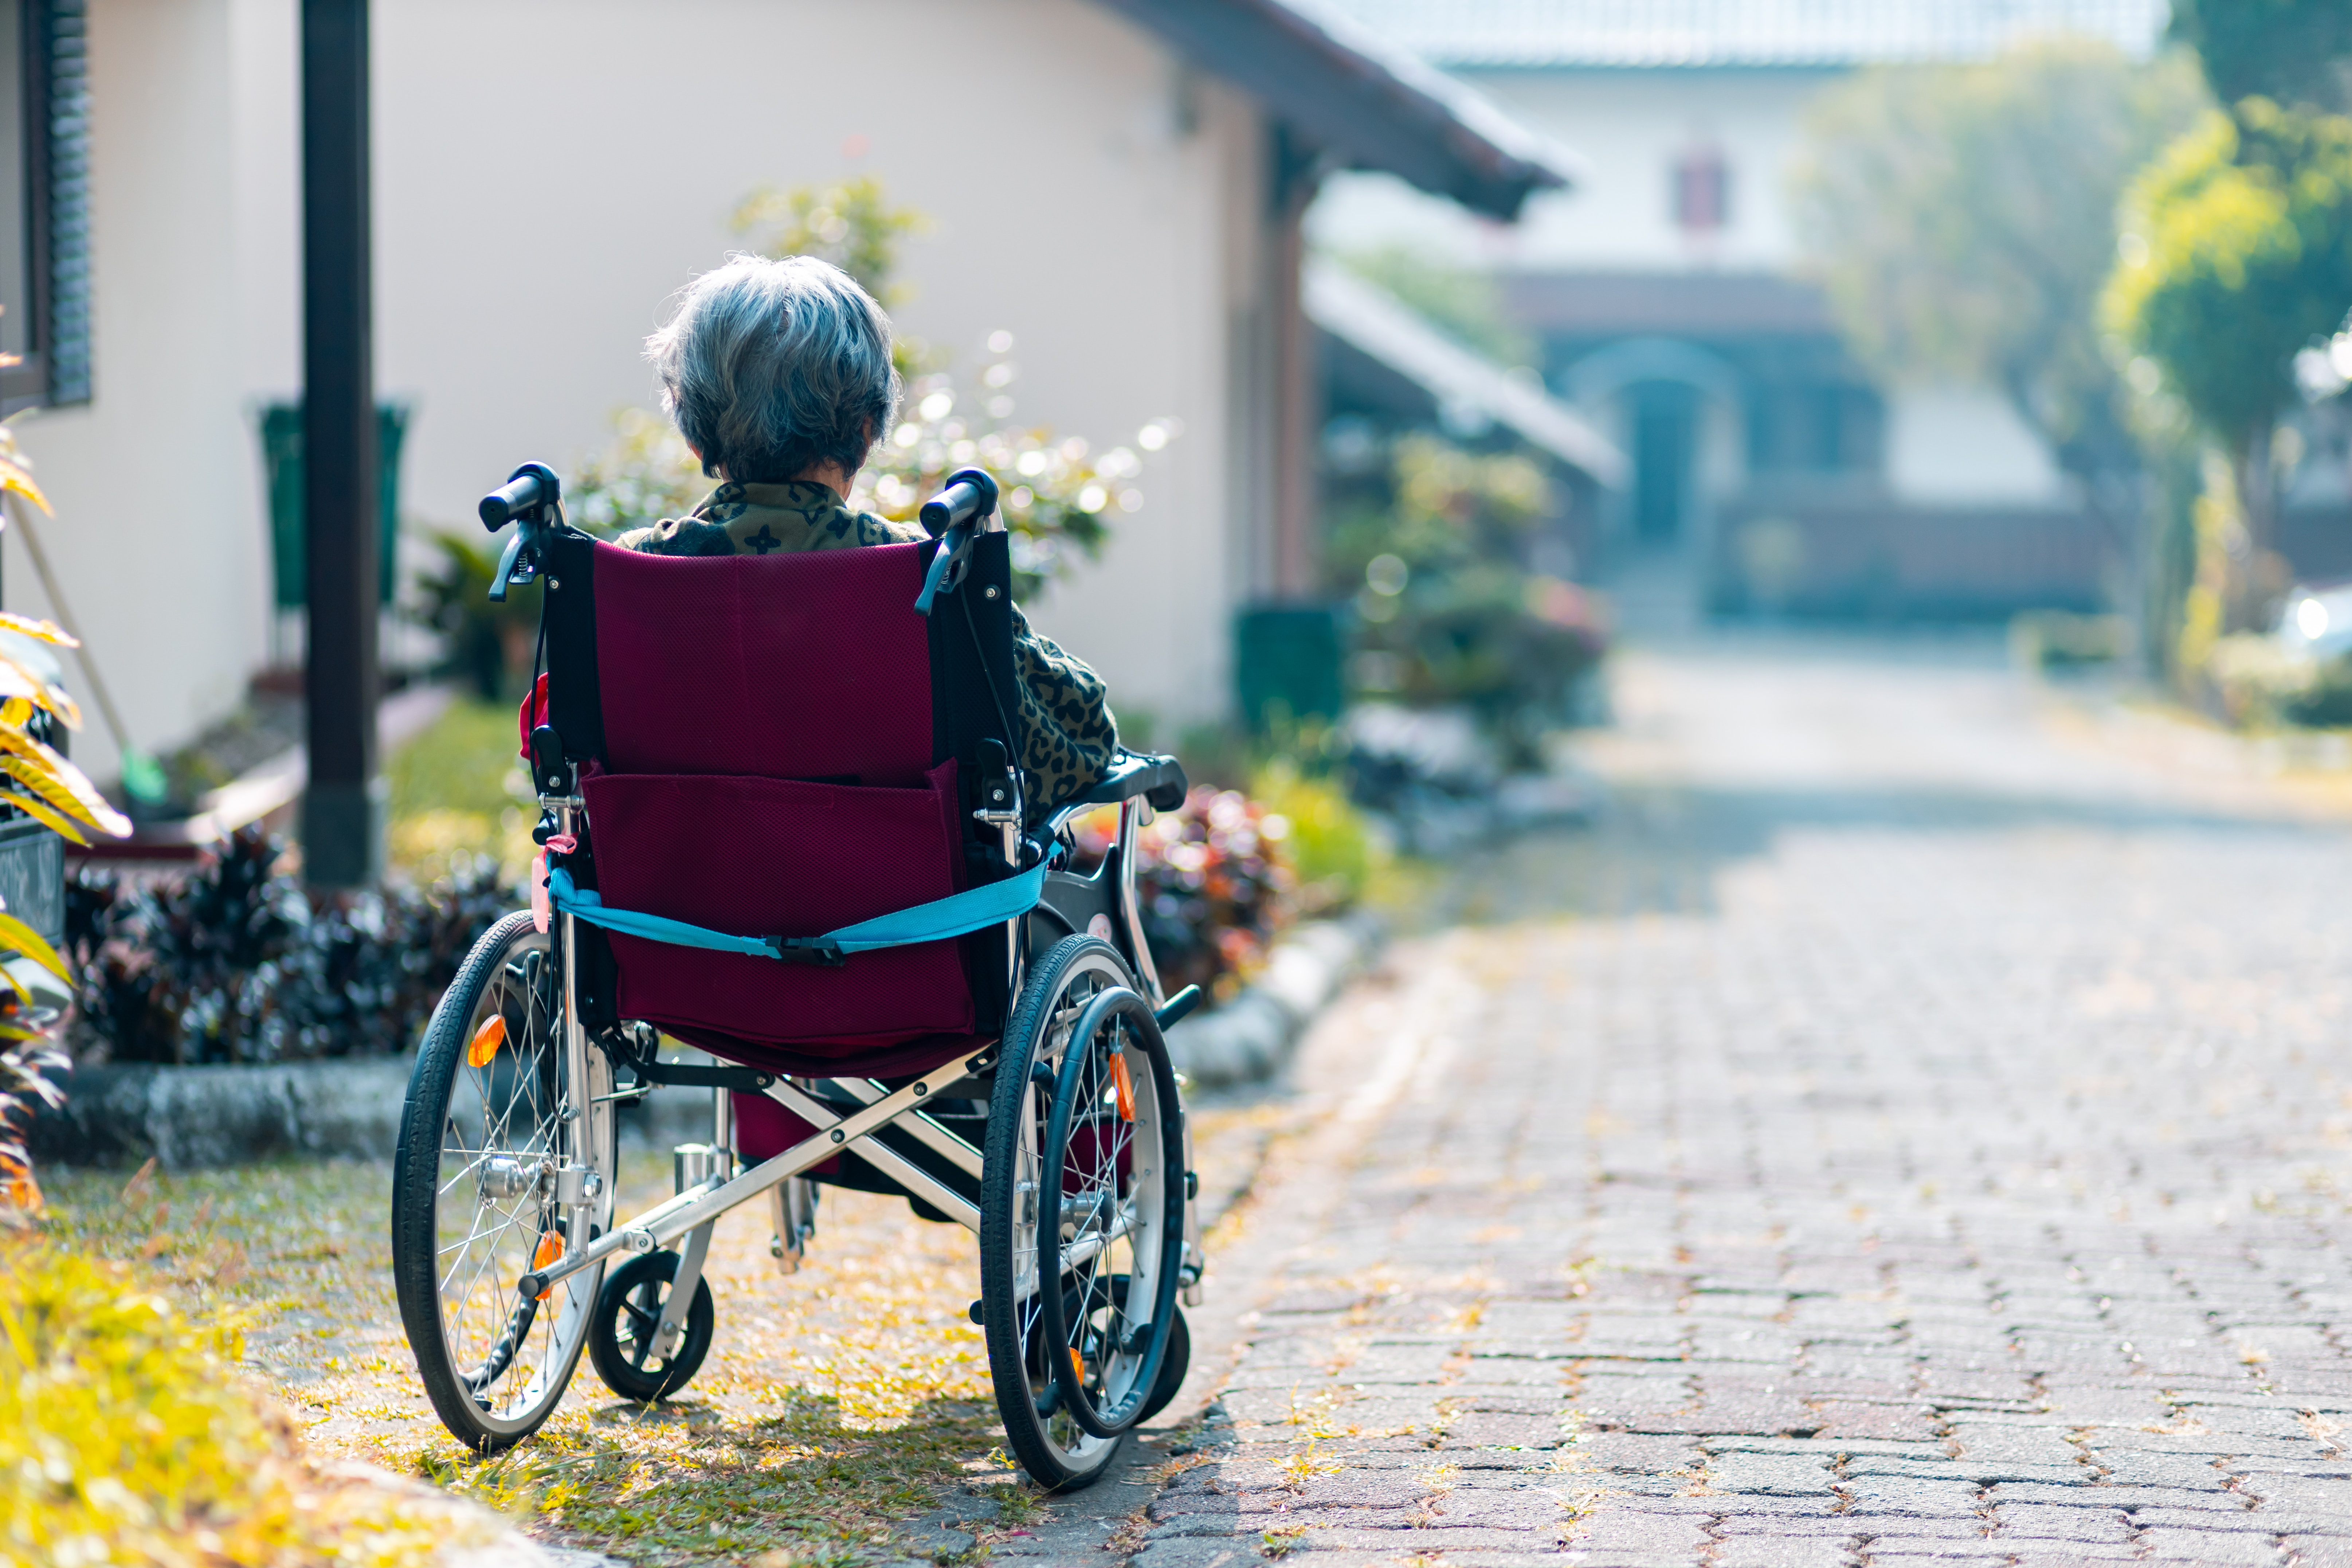 An elderly lady sitting in a wheelchair in the driveway of her home.